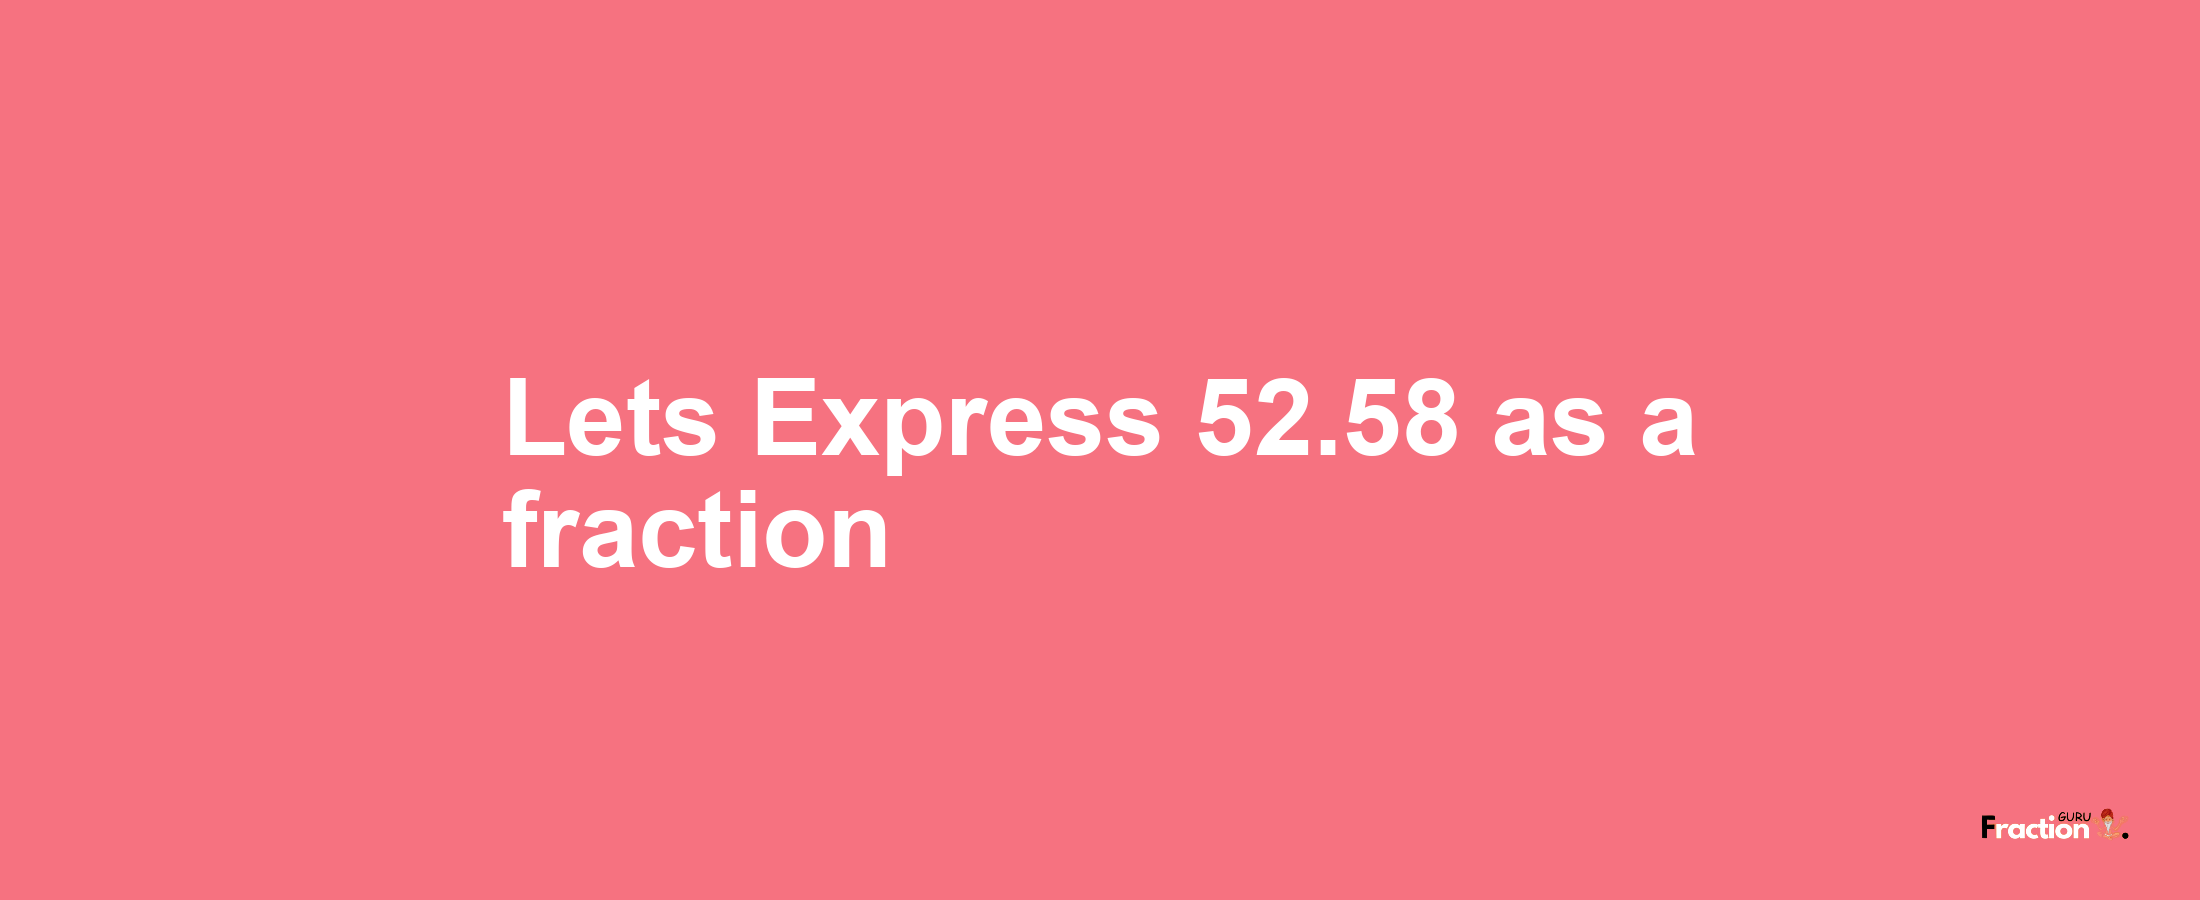 Lets Express 52.58 as afraction